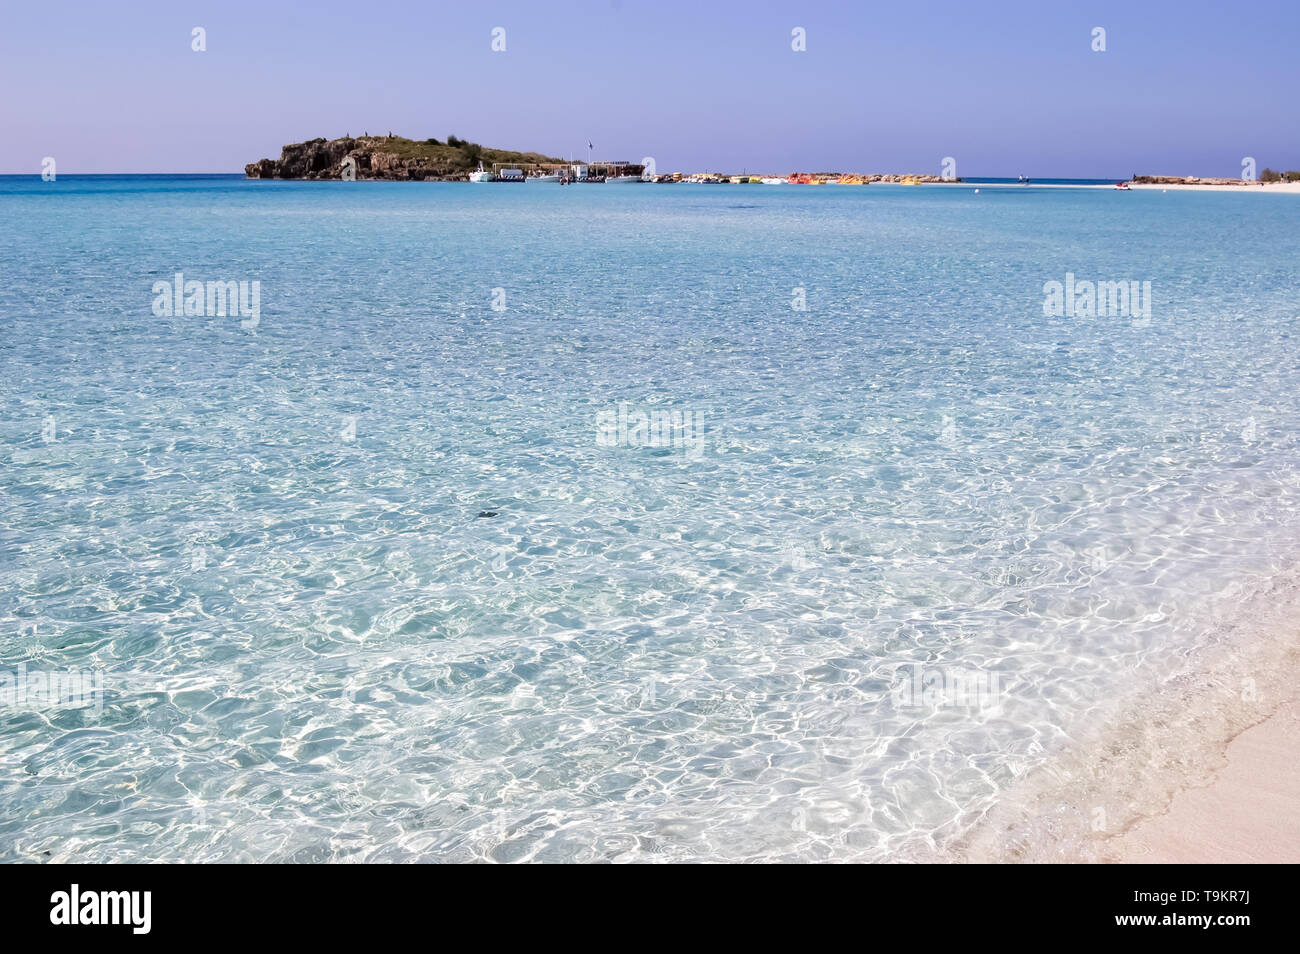 The picturesque coast with the cleanest sea and white sandy beach in the resort of Ayia Napa, Cyprus. Stock Photo